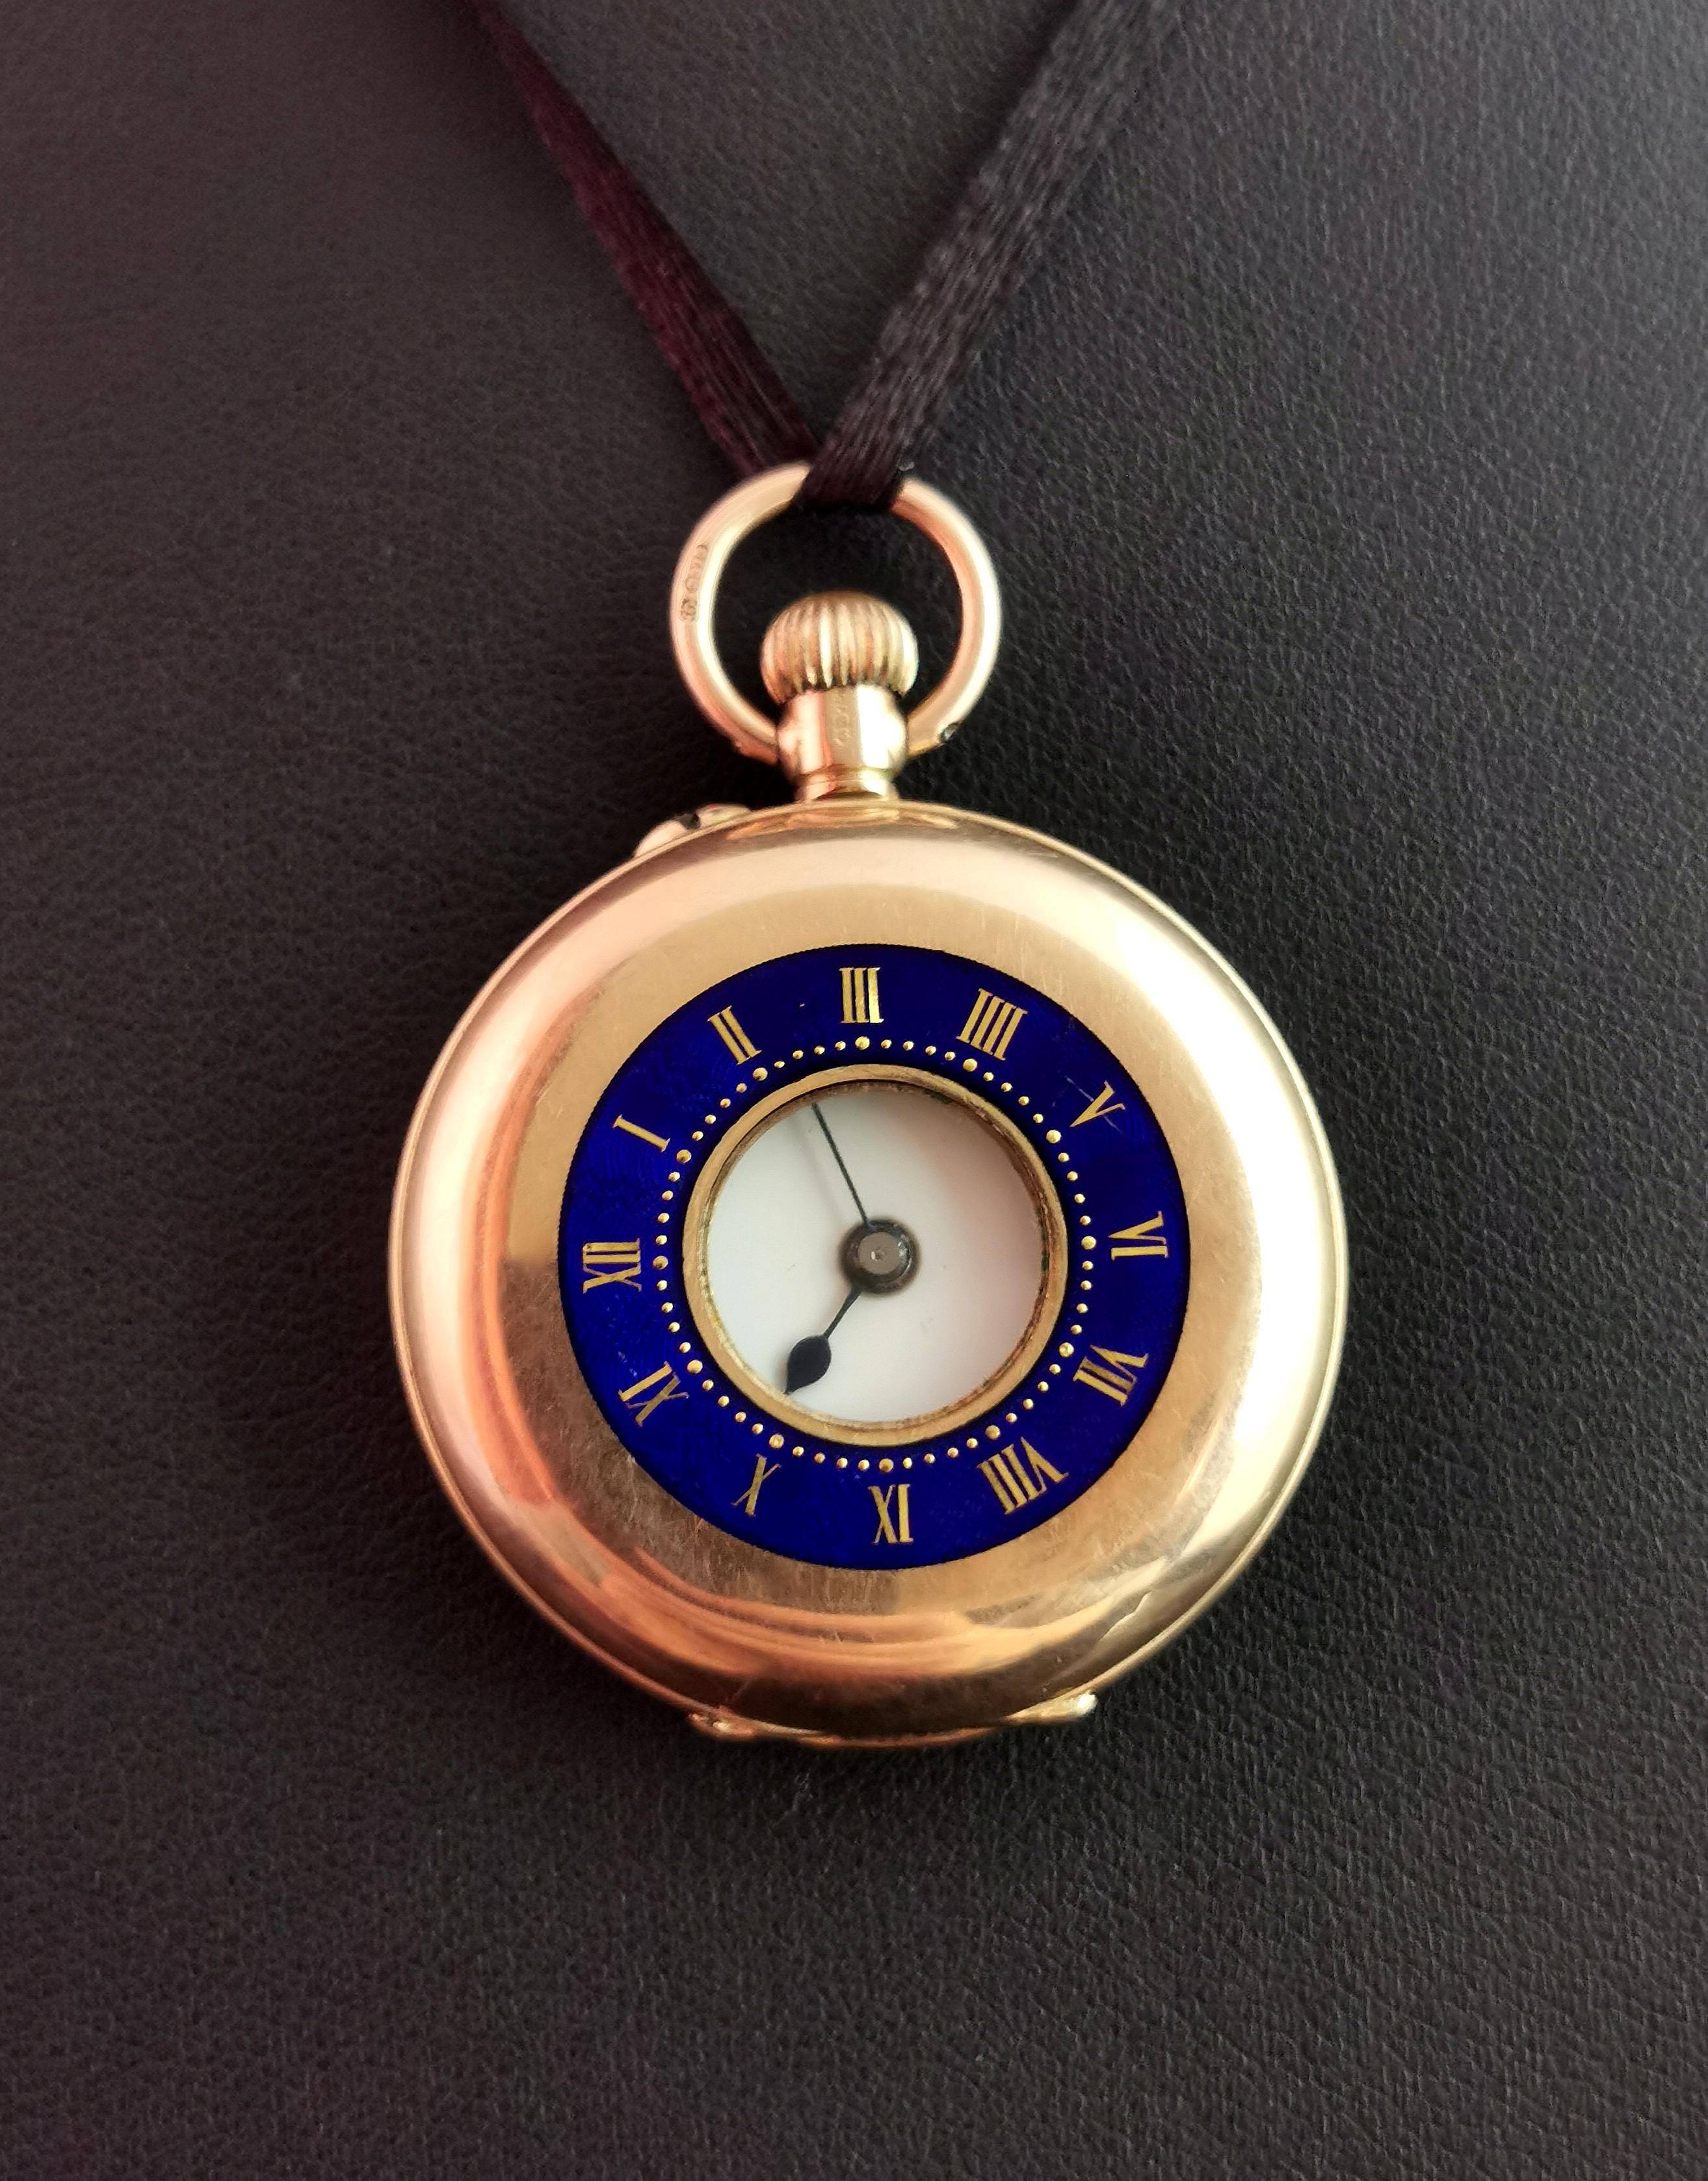 A beautiful antique 9 karat gold and blue enamel half hunter pocket watch or fob watch.

It is a smaller sized watch, suitable for ladies or gents.

It has blue enamel band to the front outer case with gold gilt roman numerals picked out.

Fully